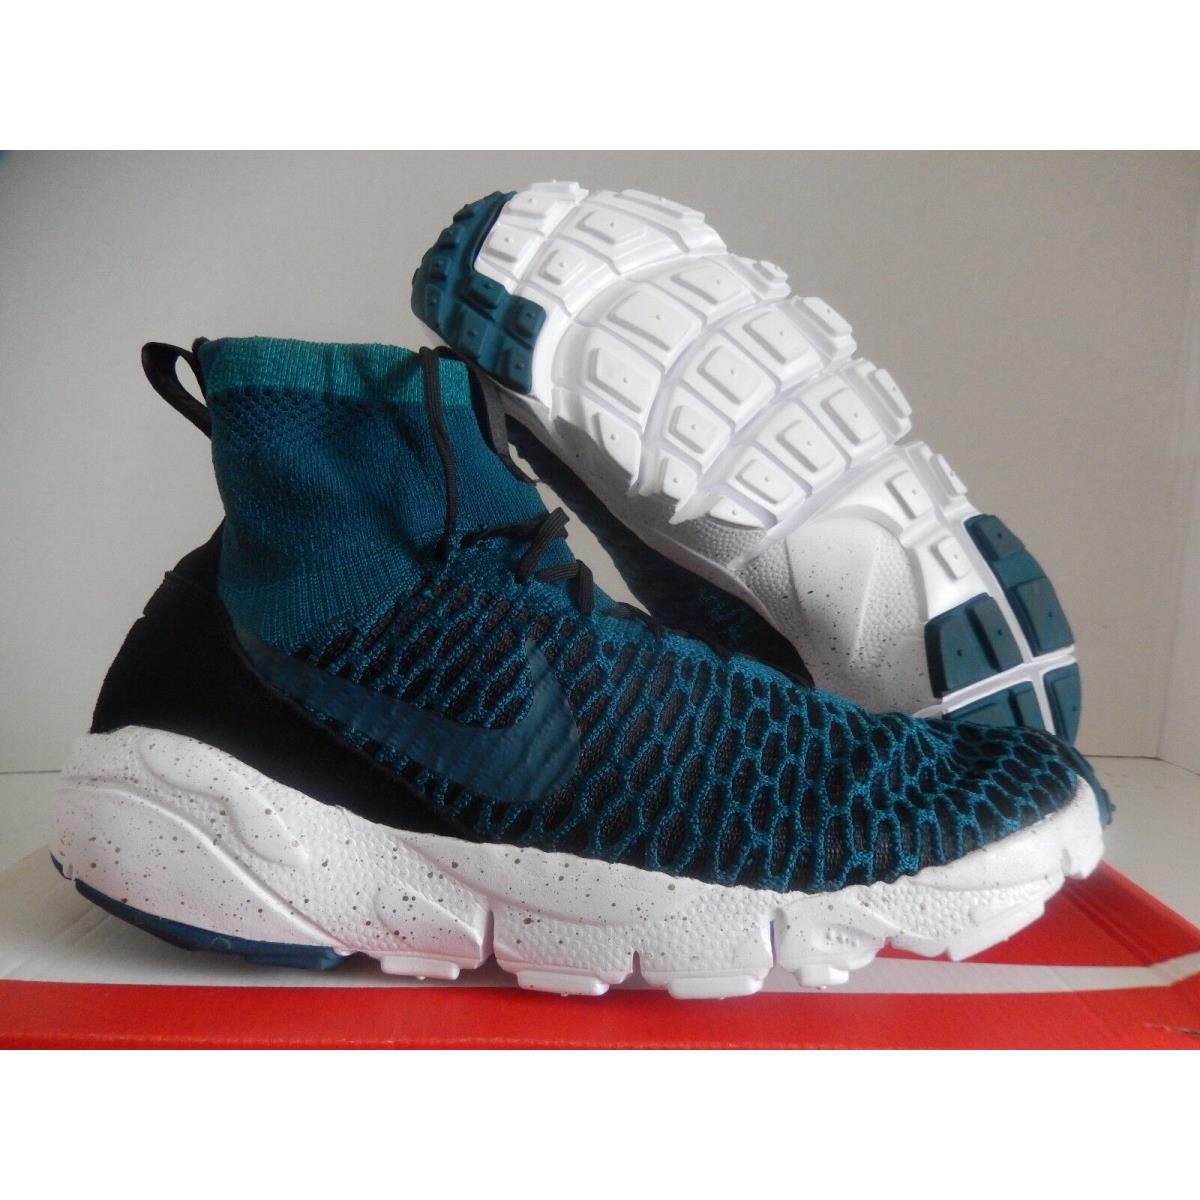 Tranvía ideología Inmuebles Nike Air Footscape Magista FK FC Flyknit Midnight Turquoise SZ 10  830600-300 | 091204236135 - Nike shoes Air Footscape - Green | SporTipTop